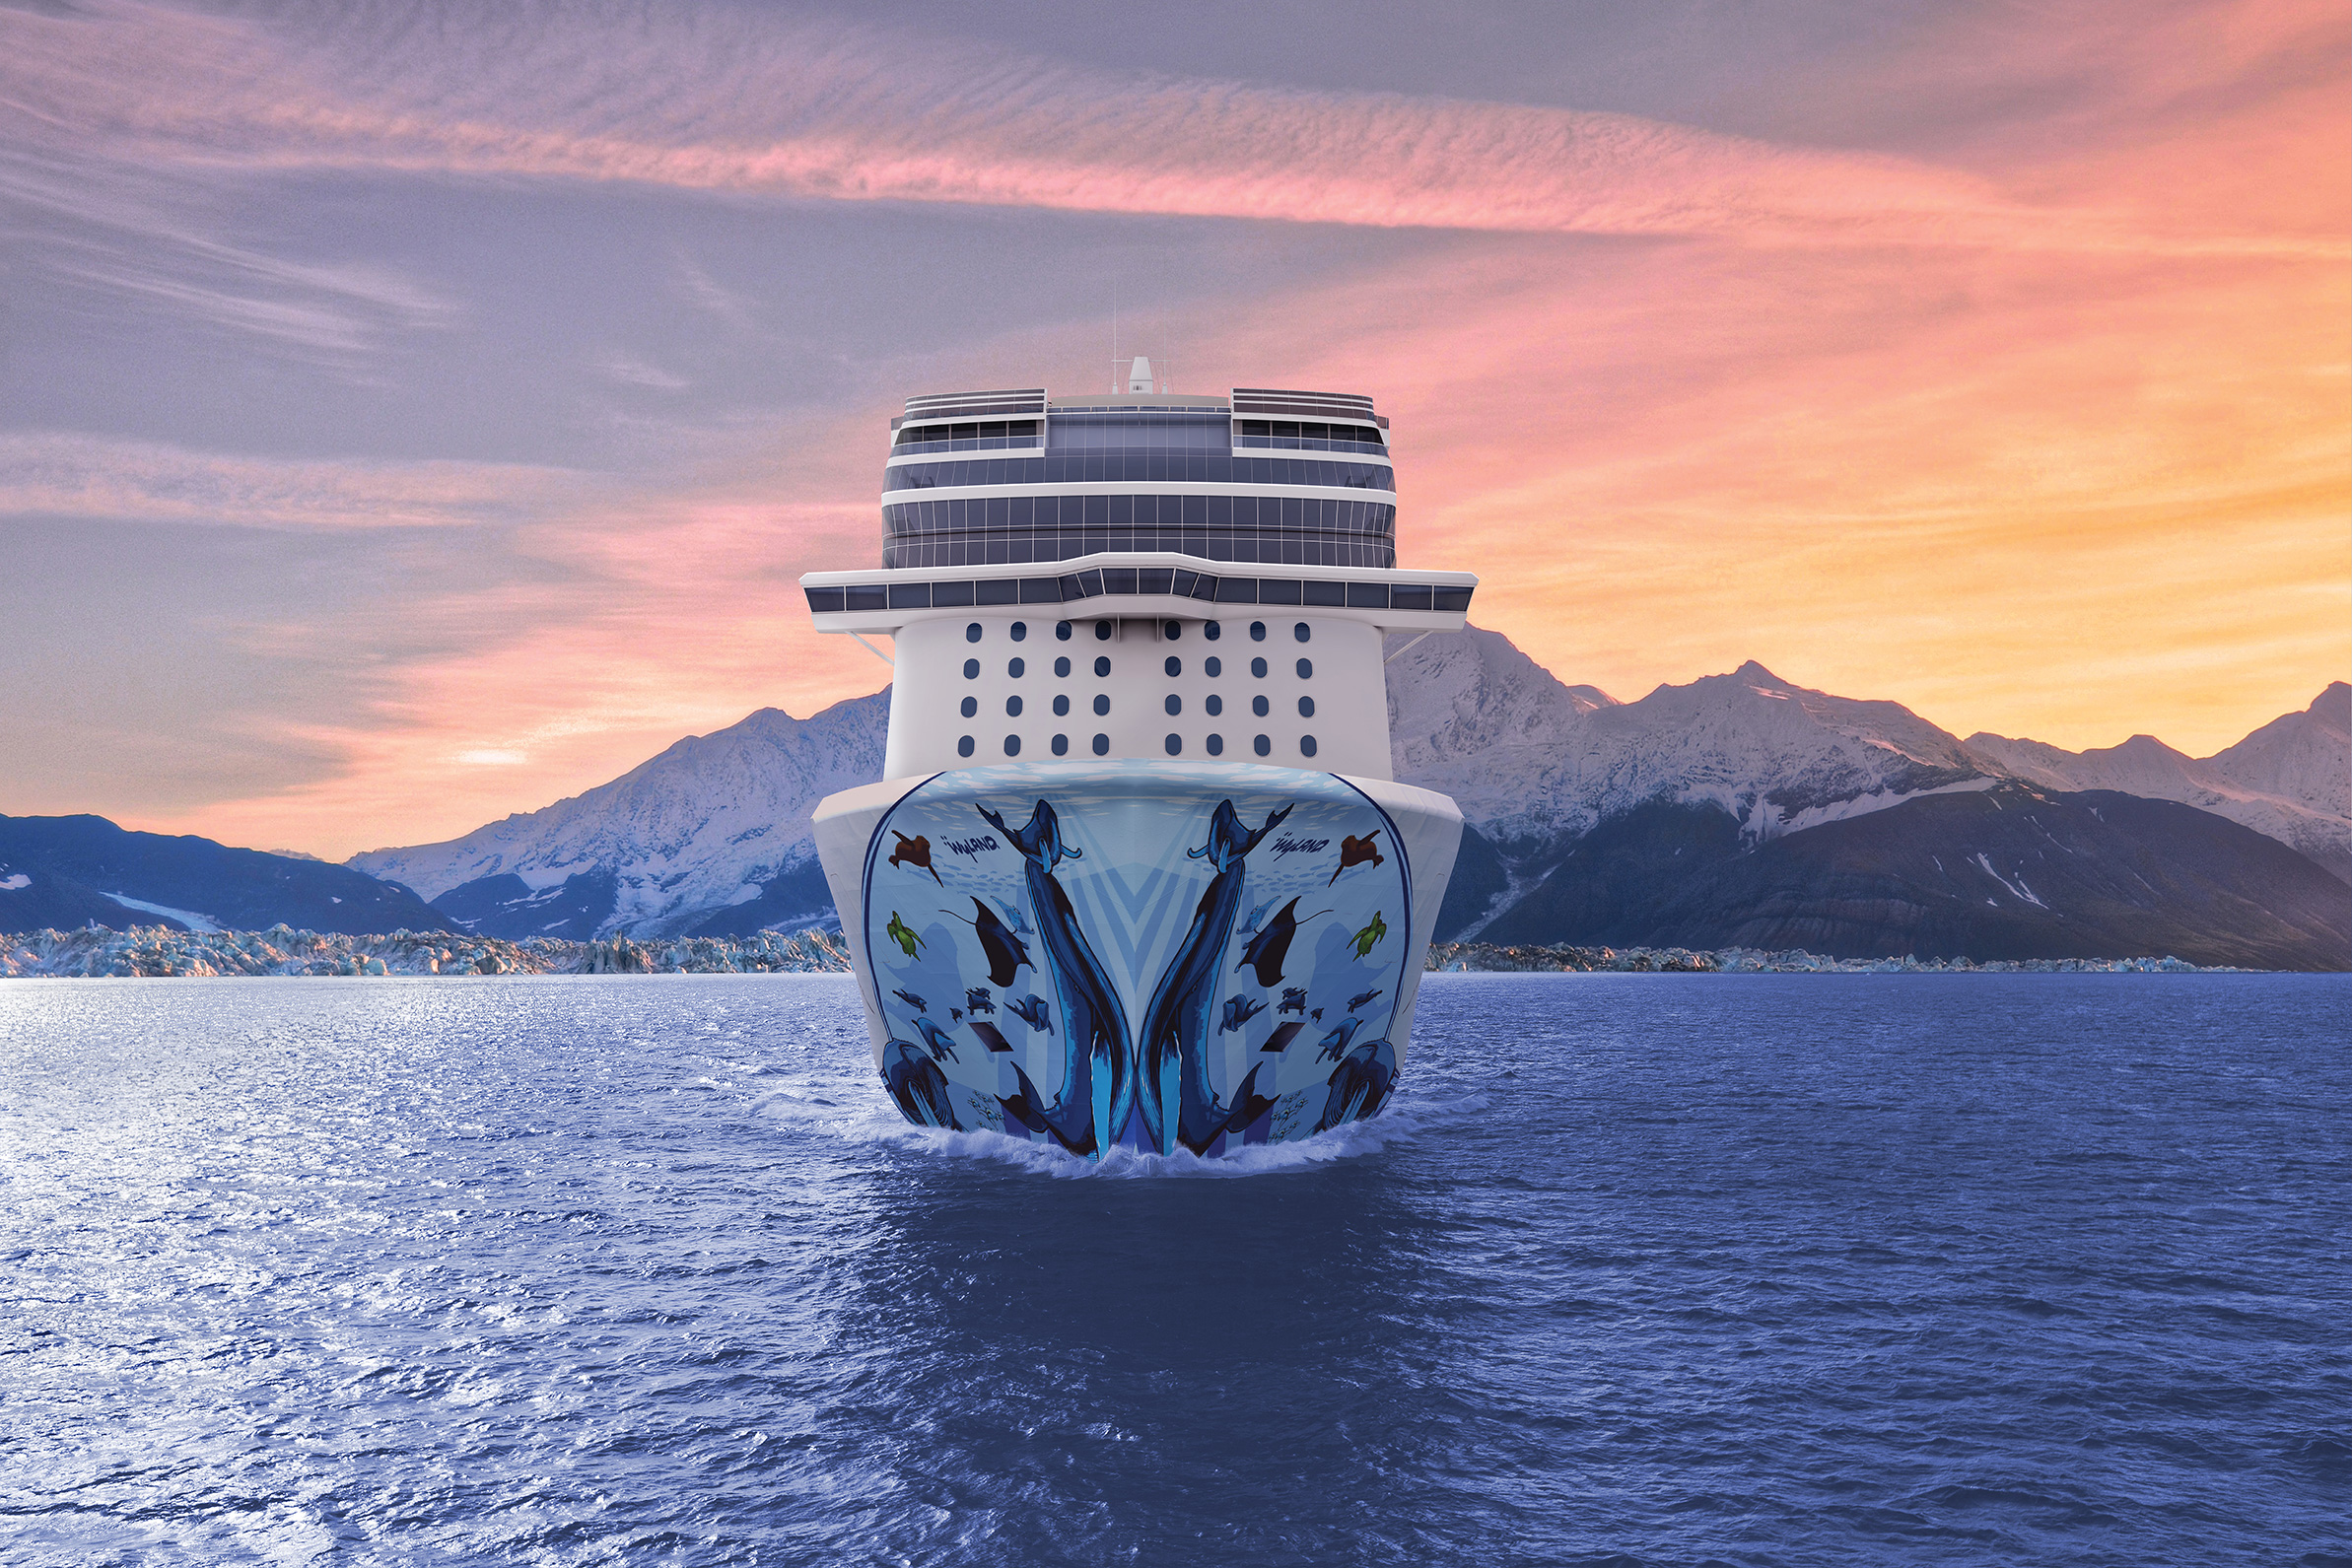 Free at Sea – neues Preismodell der NCL